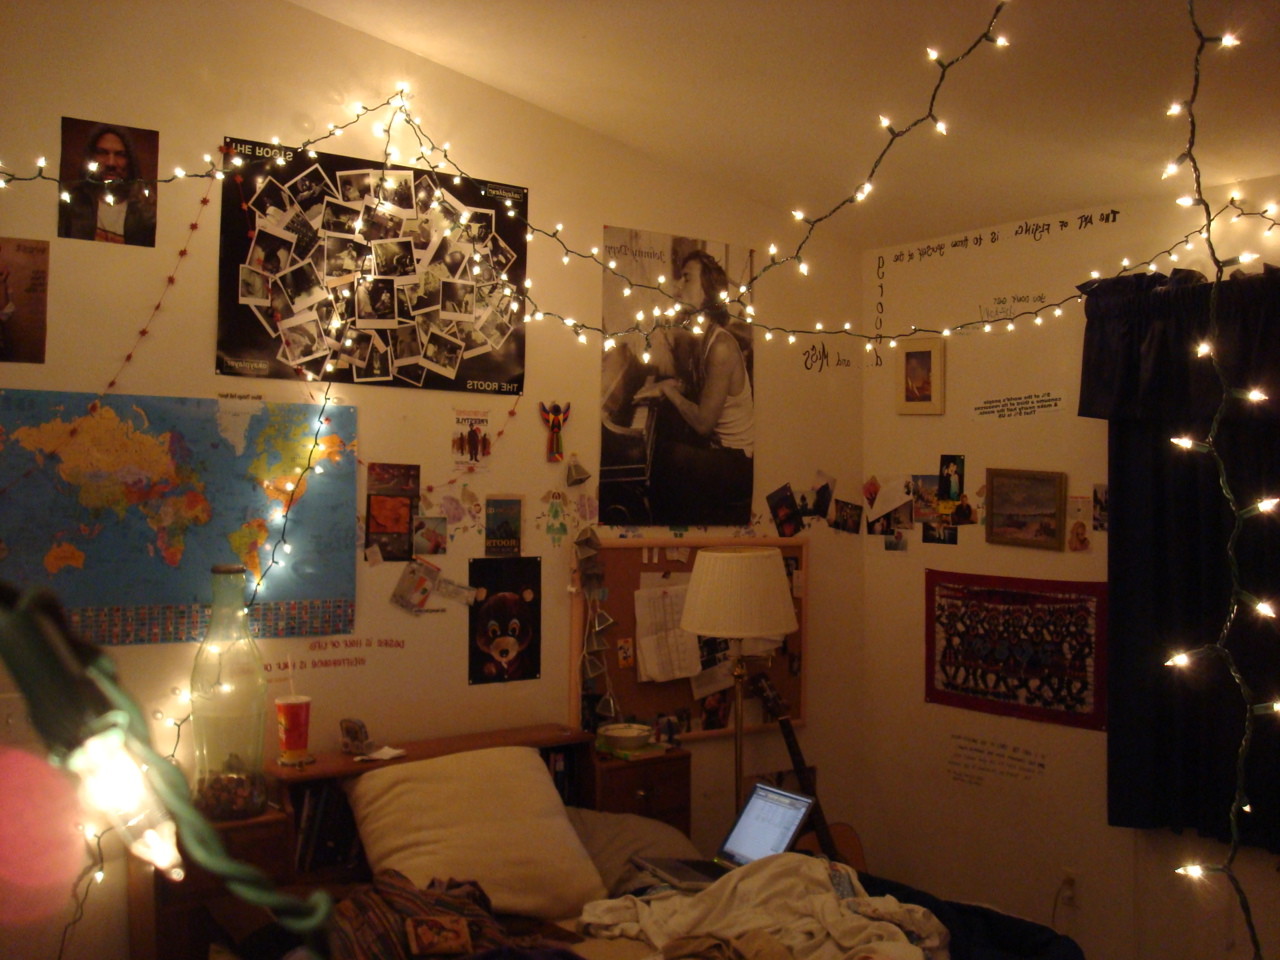 Tumblr Room With Decorated Walls - Bulb String Lights Bedroom - HD Wallpaper 